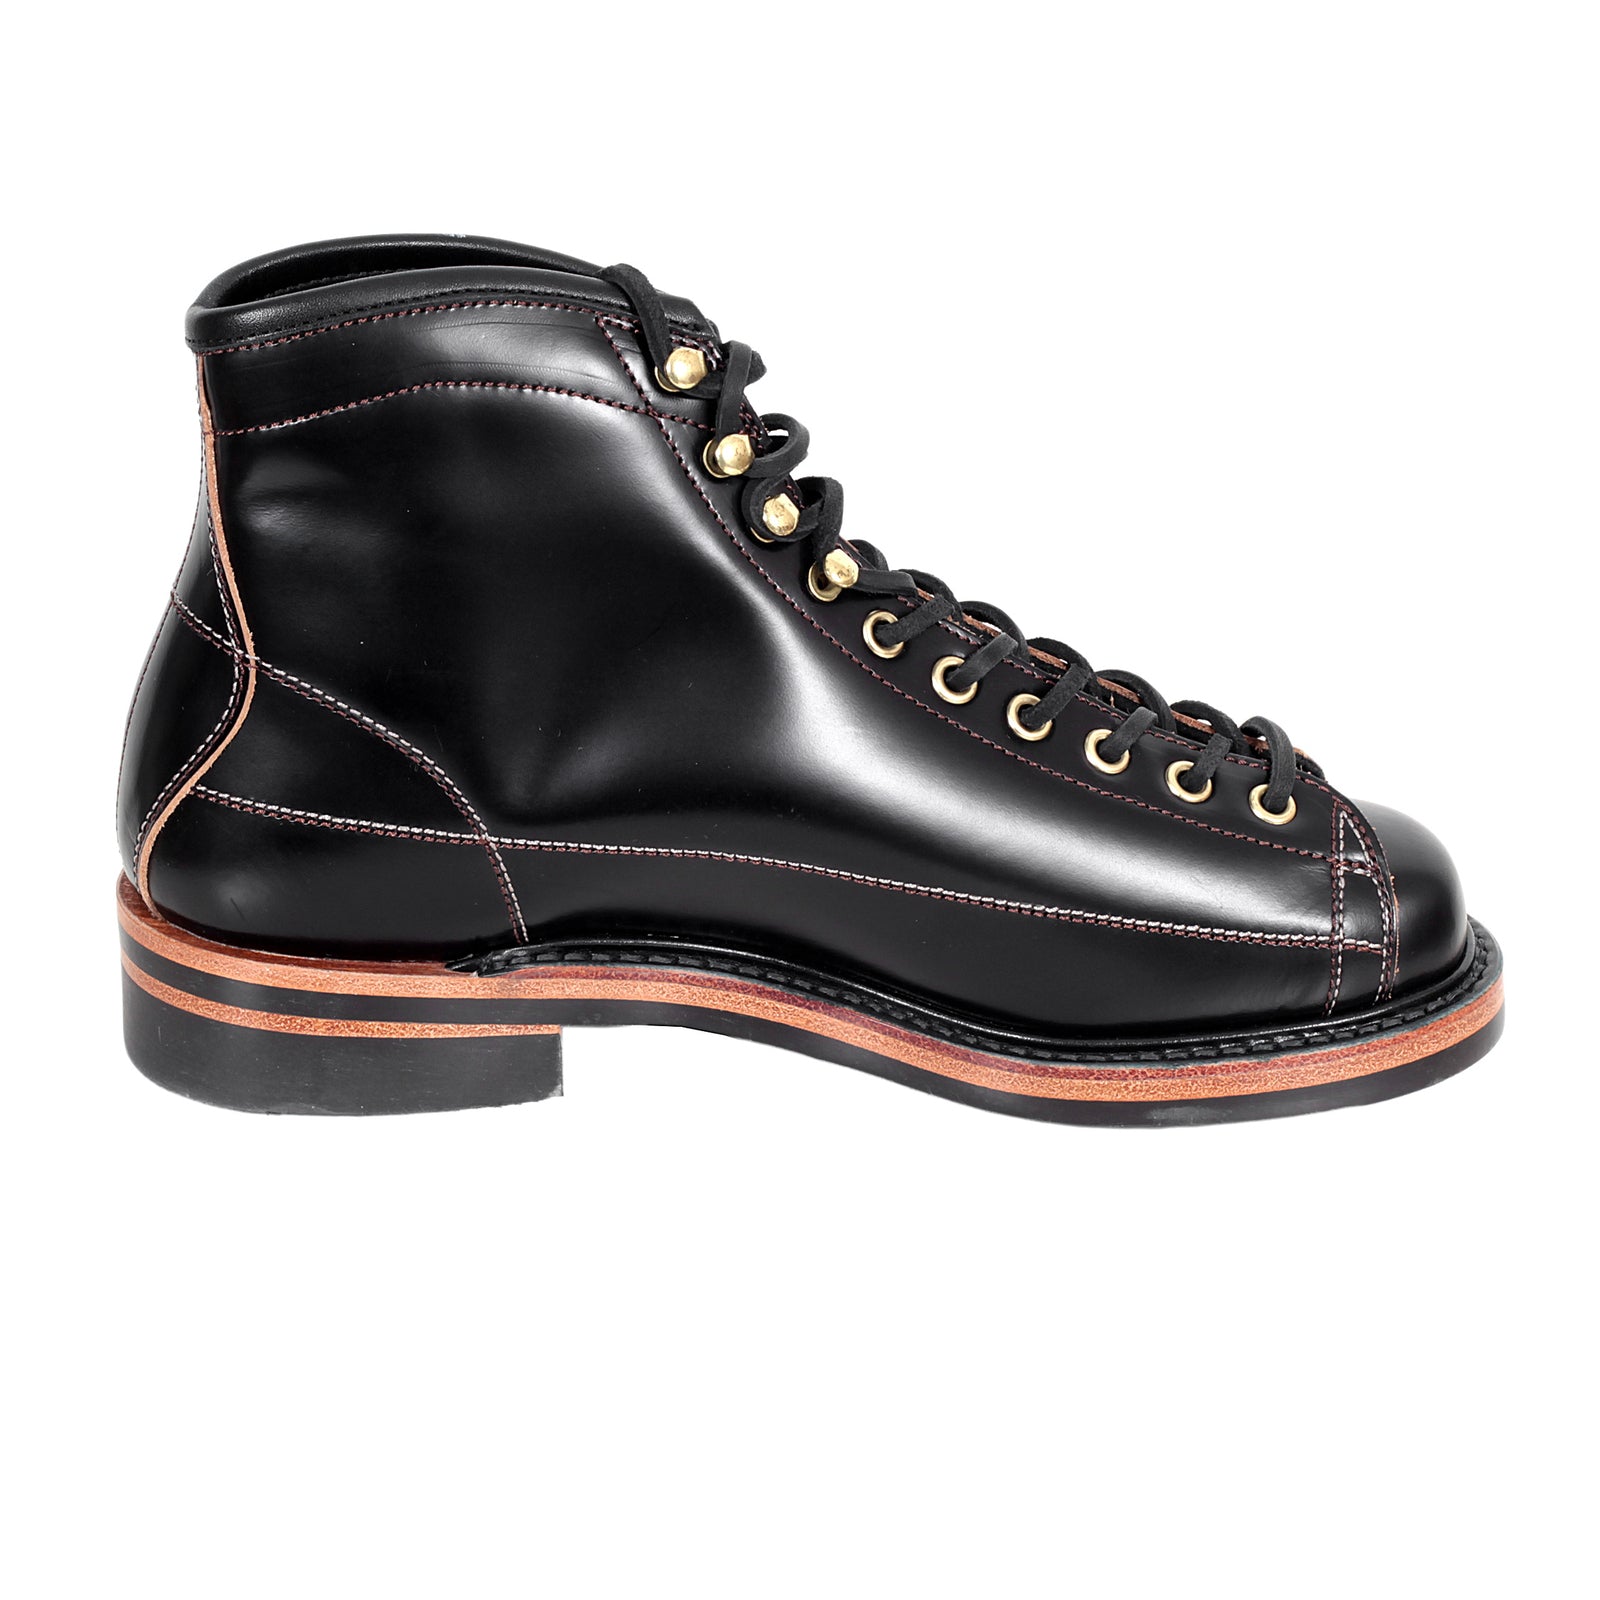 Lone Wolf Mens Black Leather Calf High LW01785 Goodyear Welted